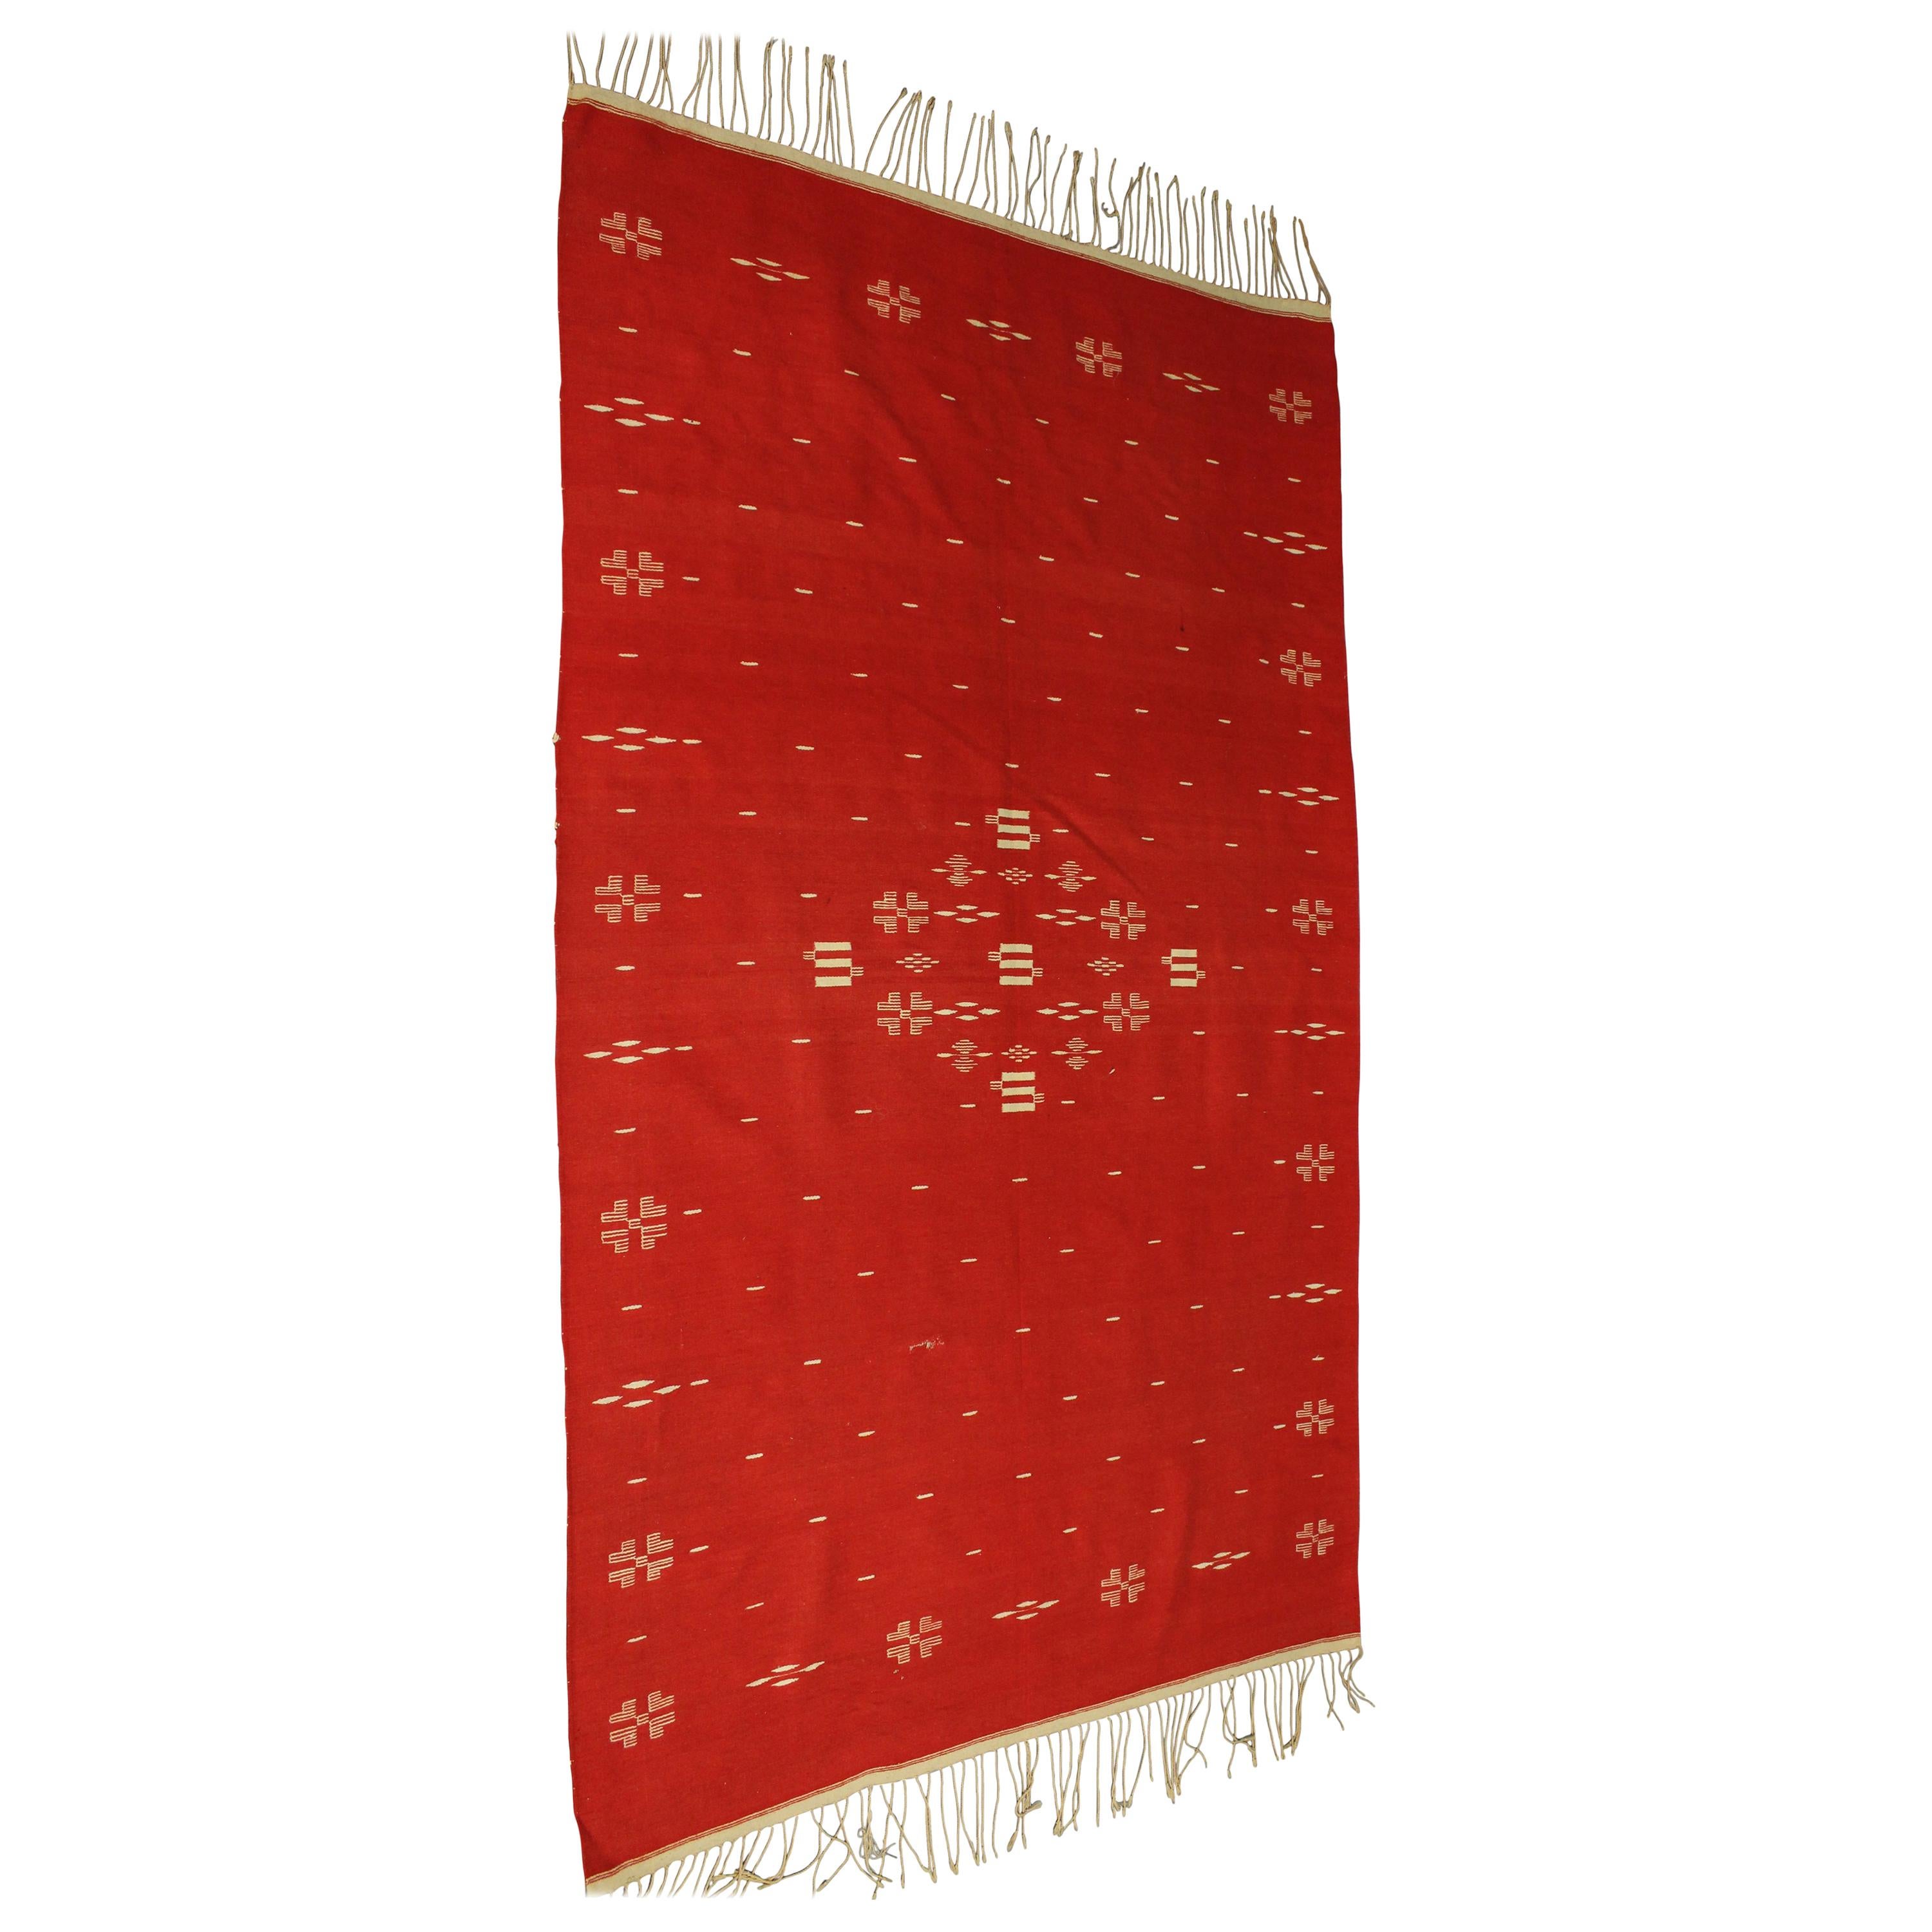 Red Texcoco Blanket, circa 1930s For Sale